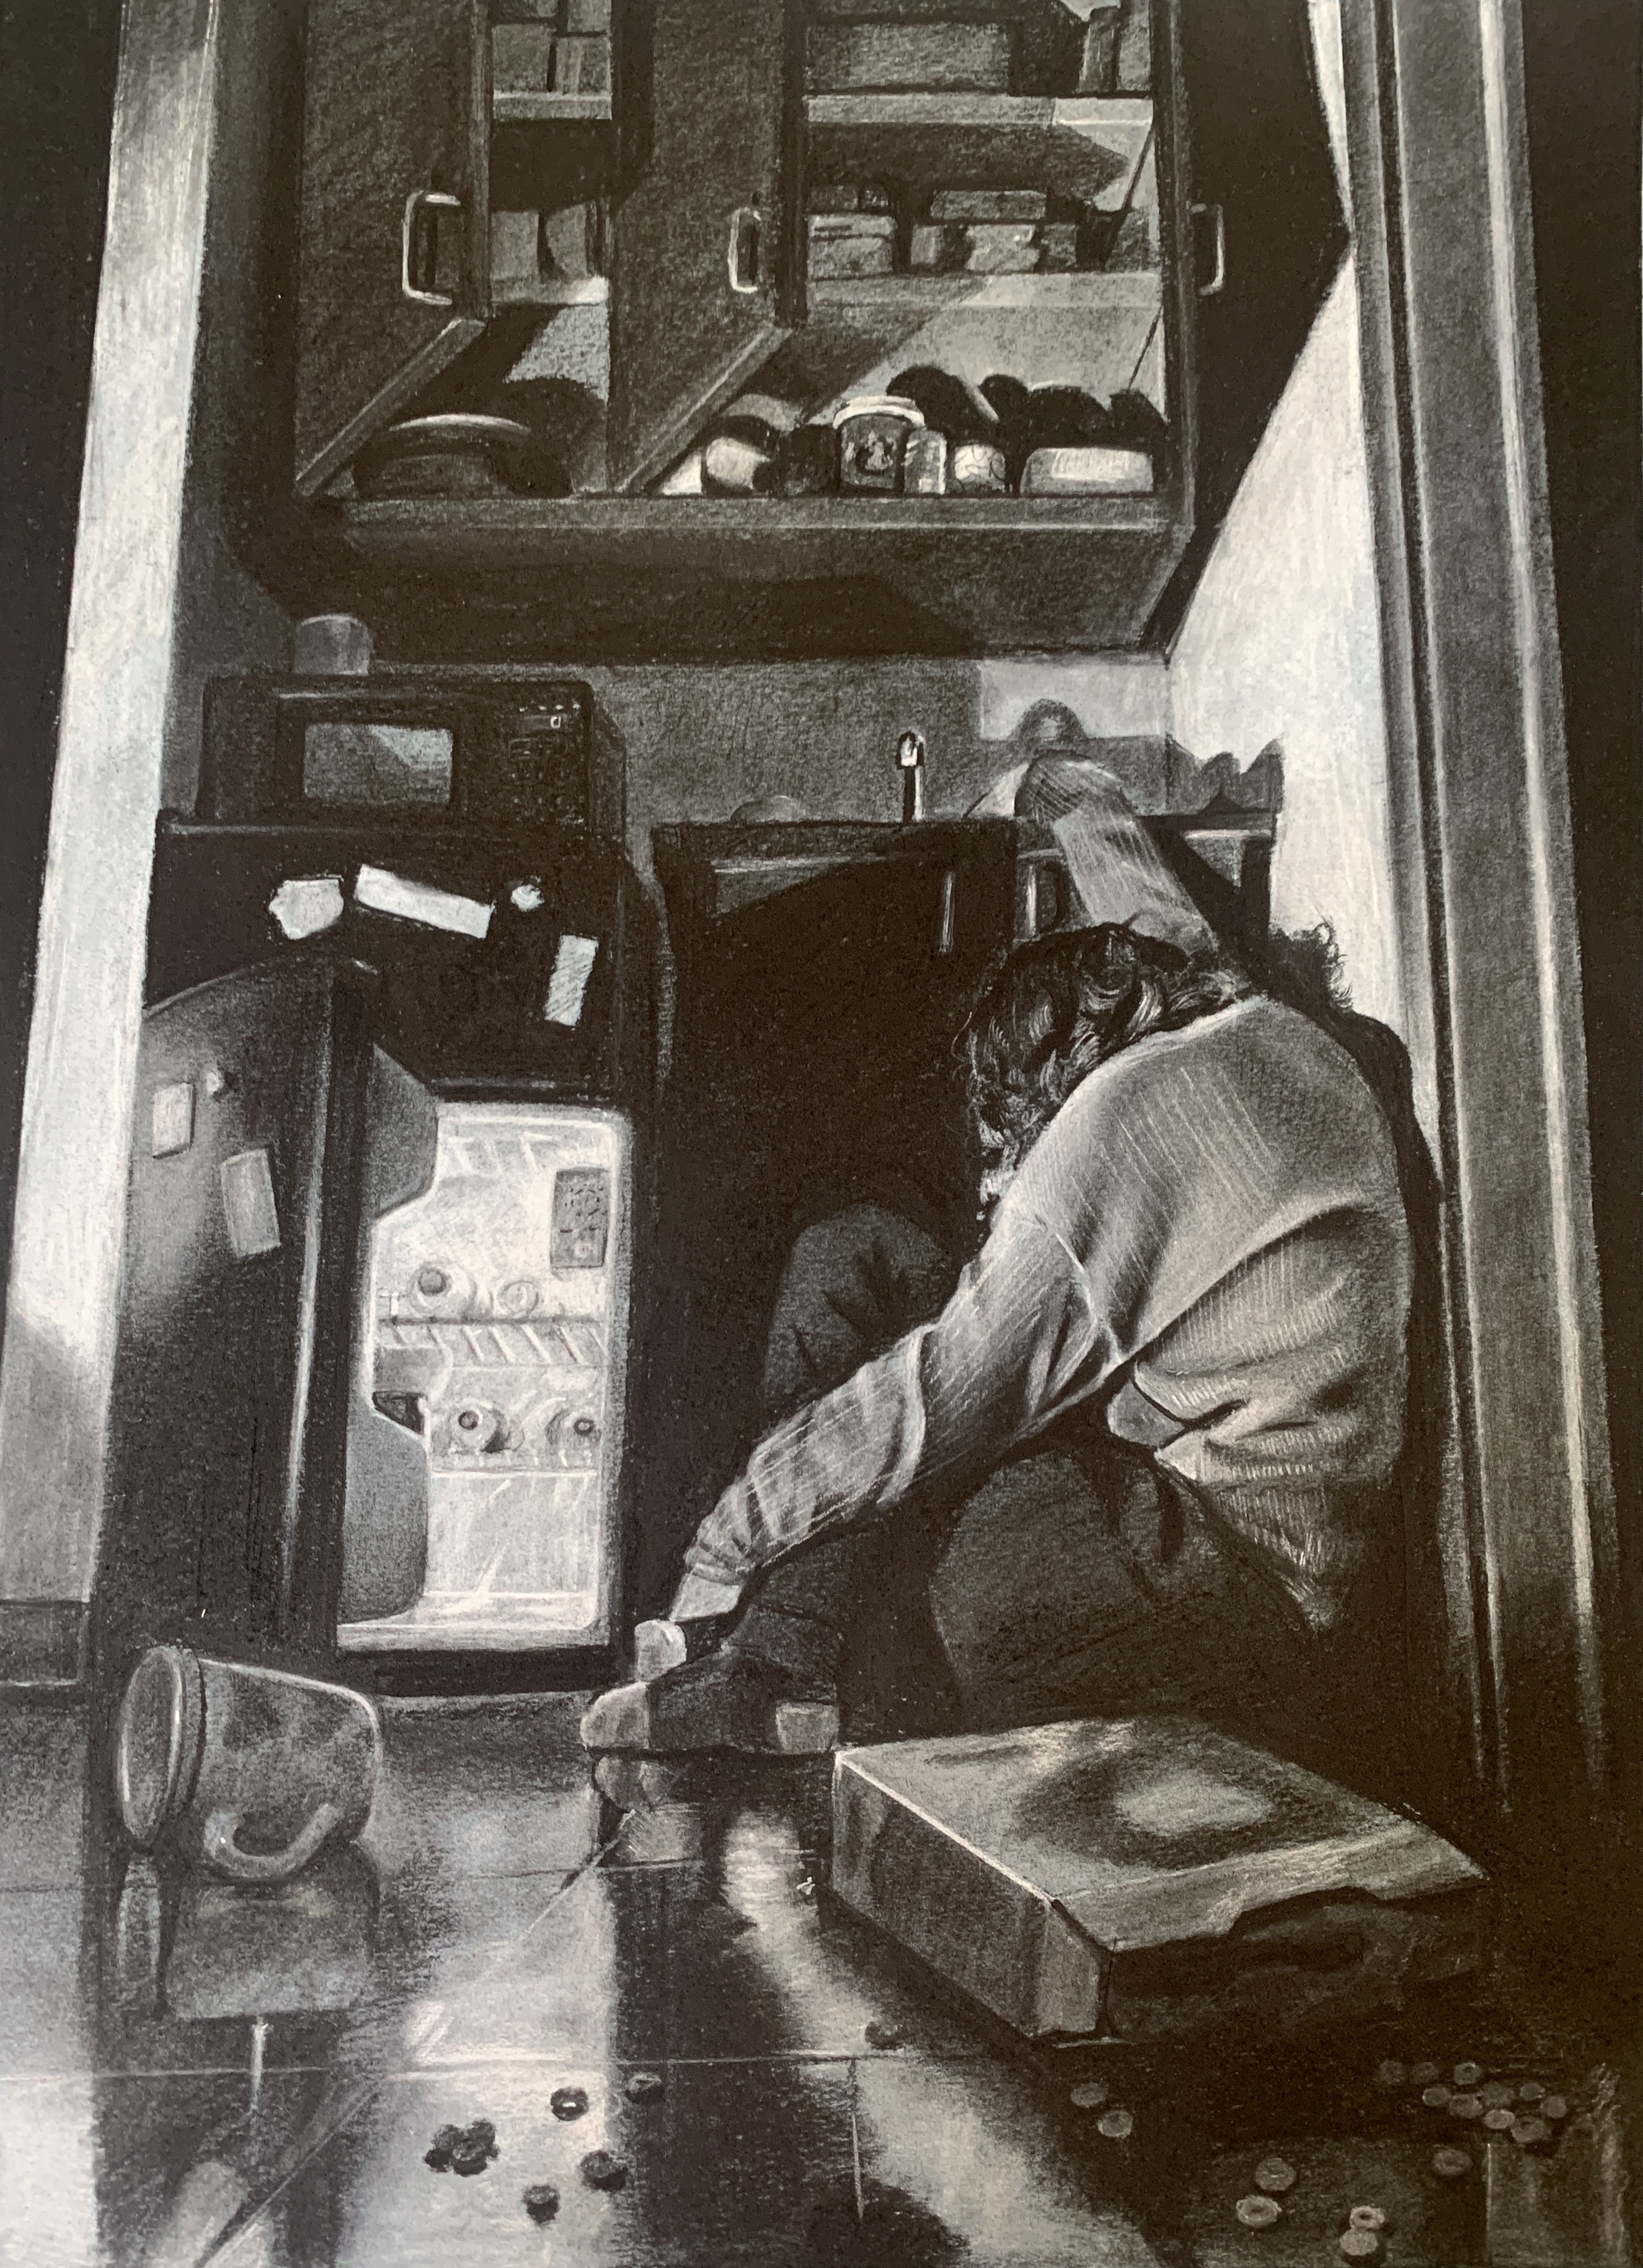 a charcoal drawing of a young woman sitting on the floor next to an open fridge